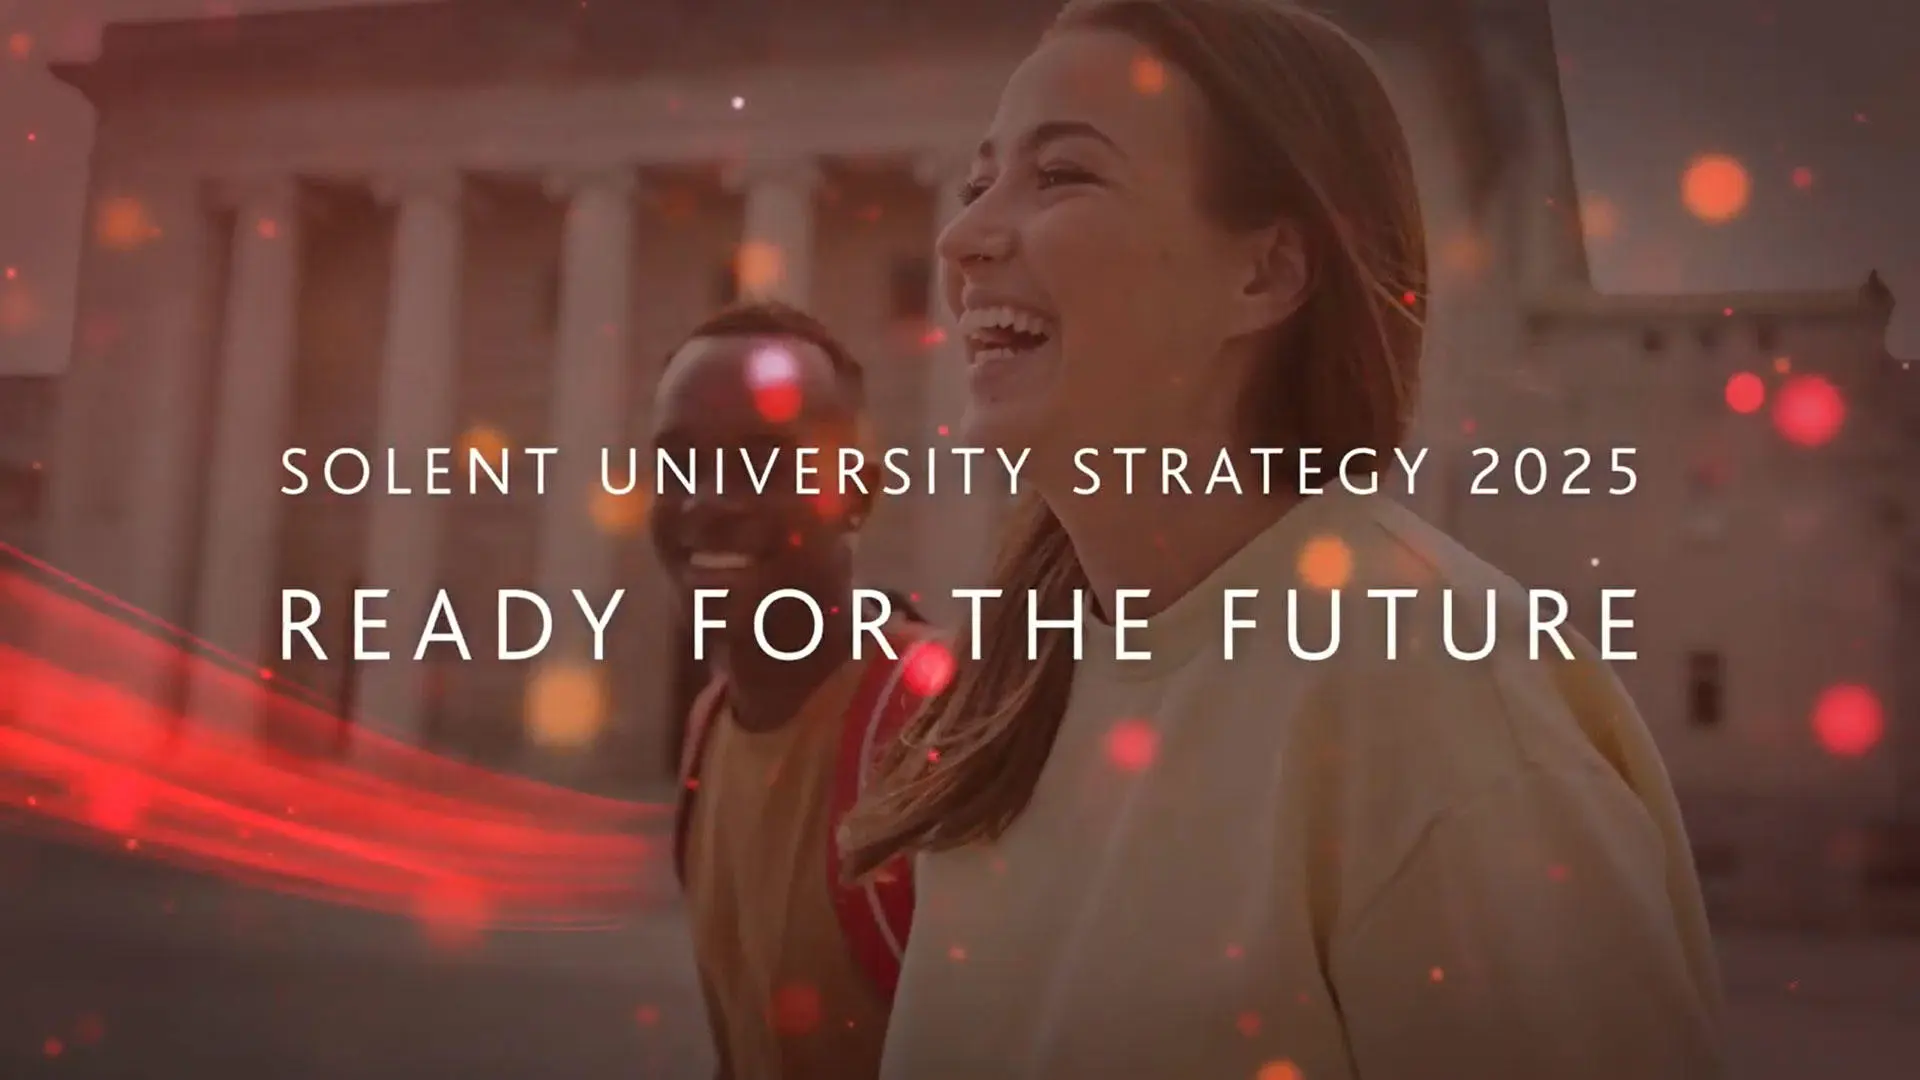 Screenshot from the strategy video showing two students with 'Solent University Strategy 2025 Ready for the Future' overlaid